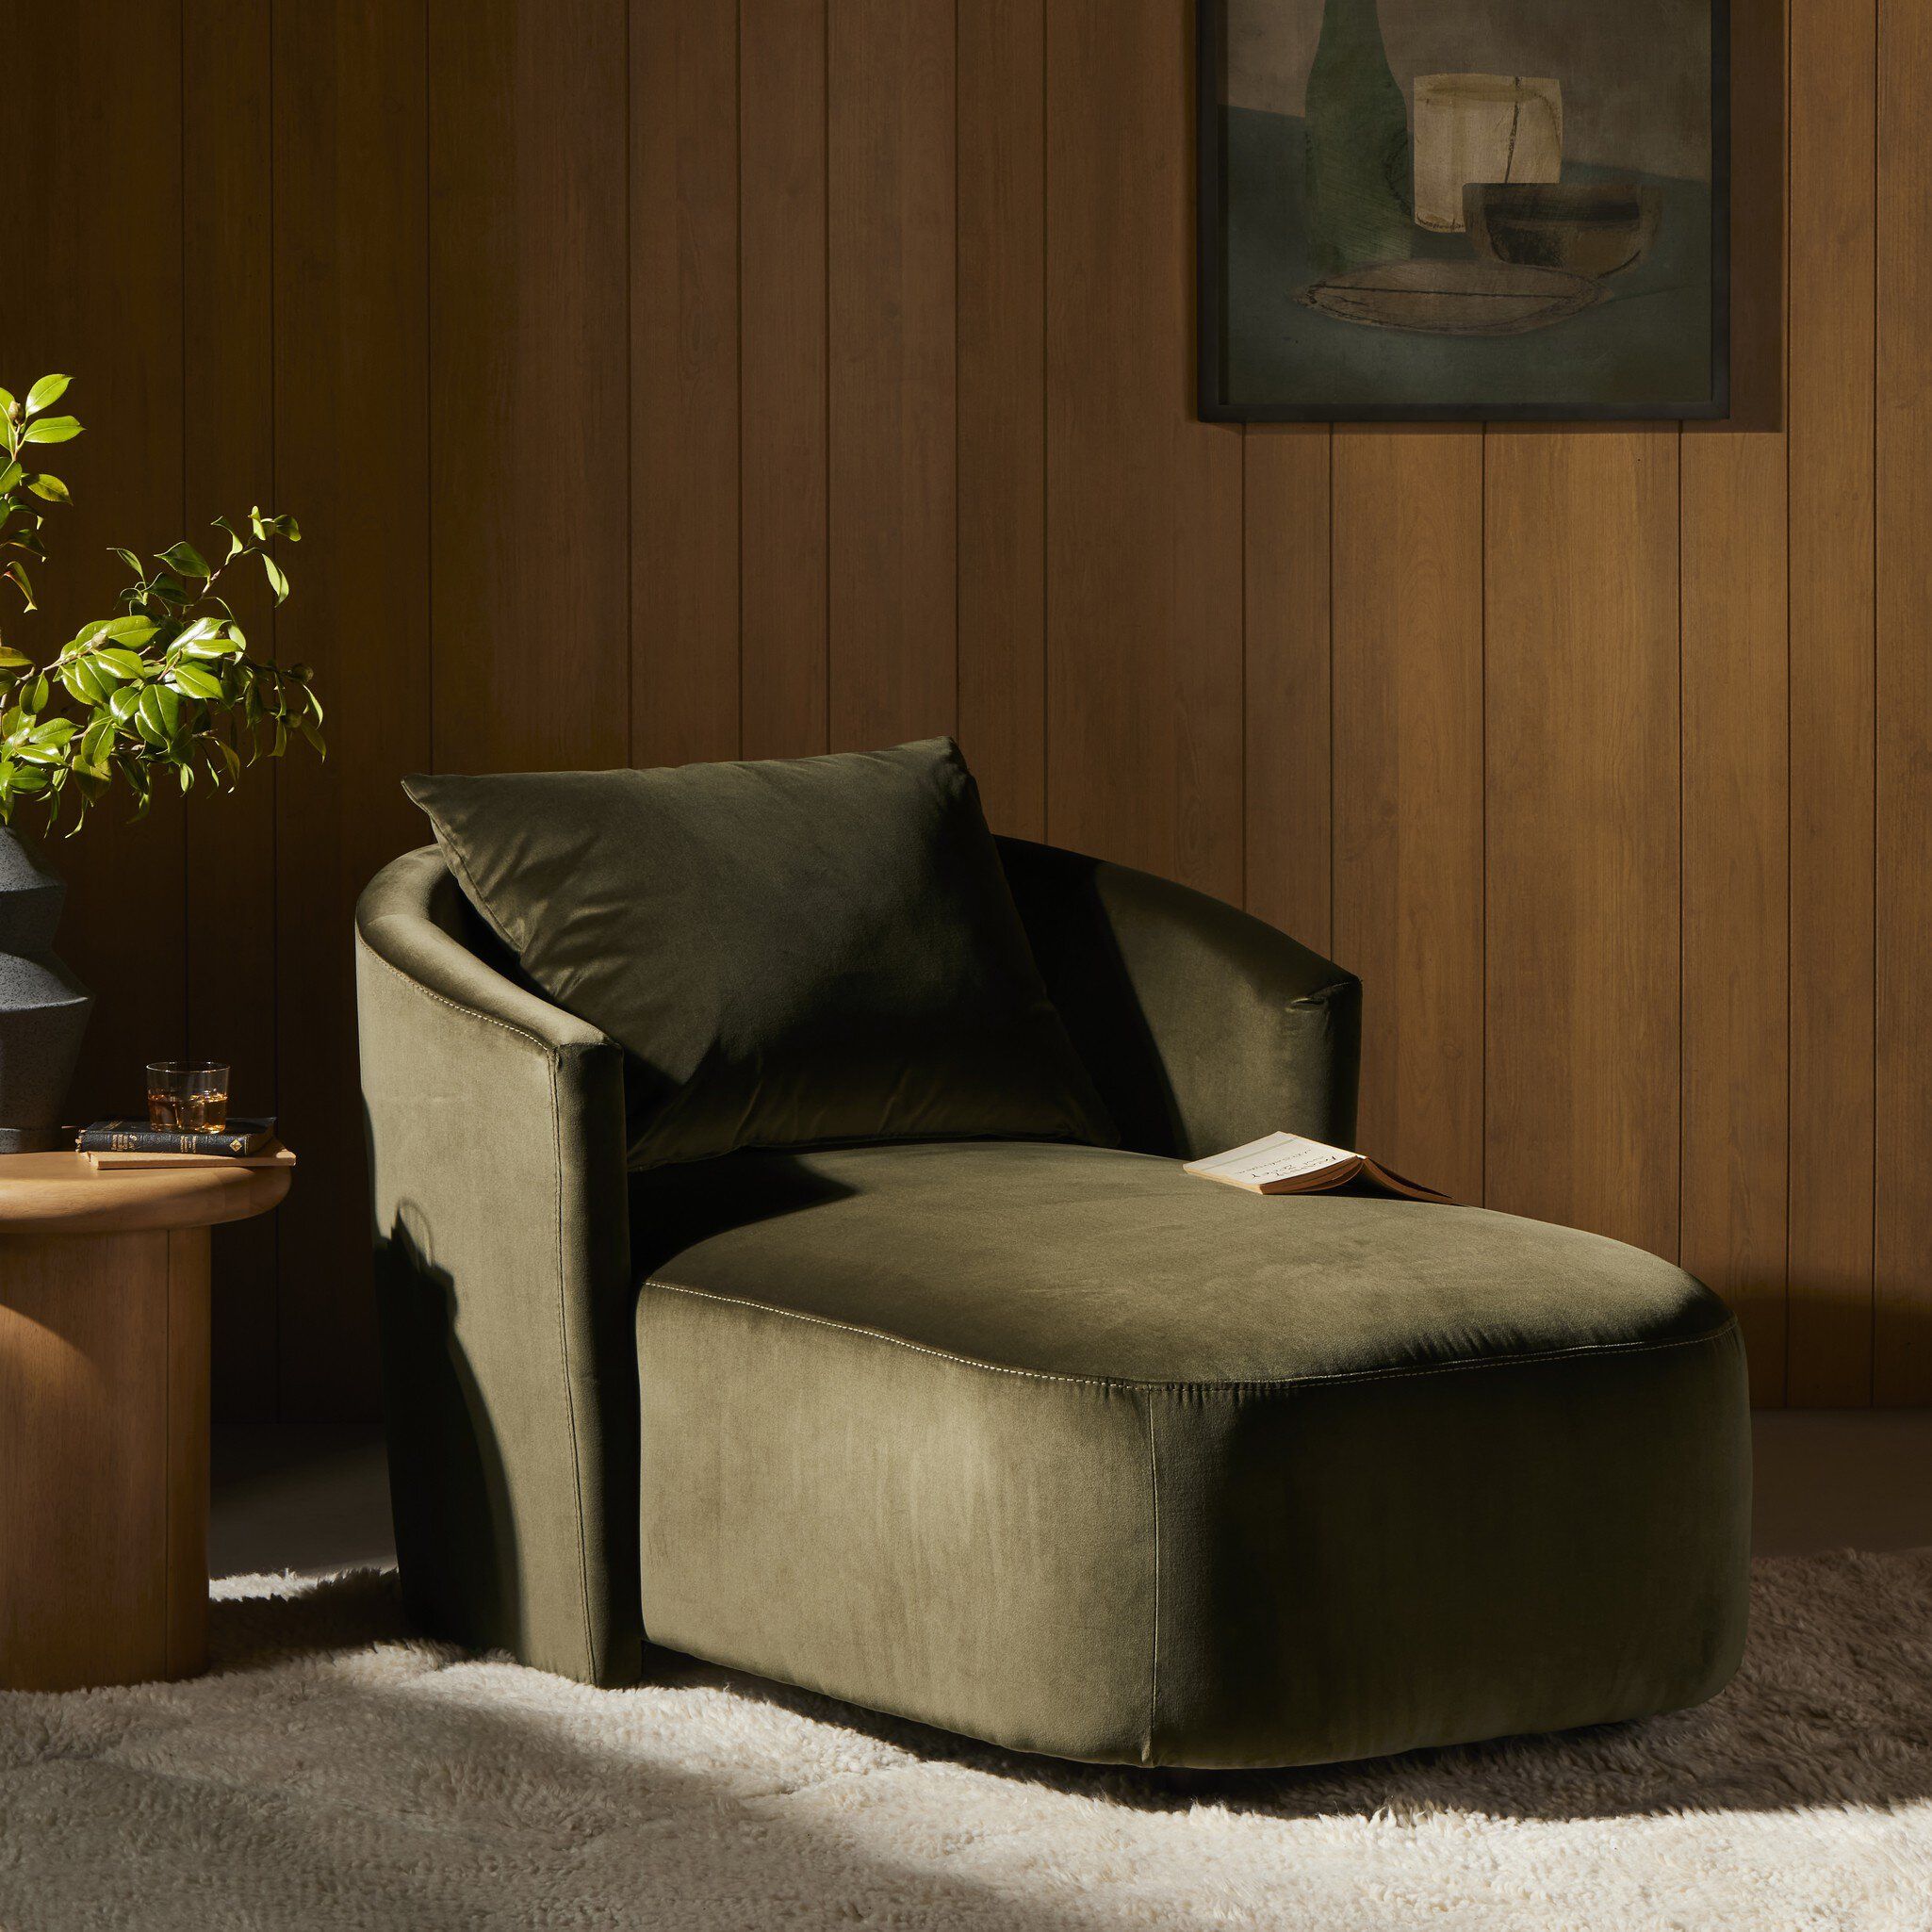 Contemporary Corner Chaise Lounge Chair: The Perfect Addition to Your Home